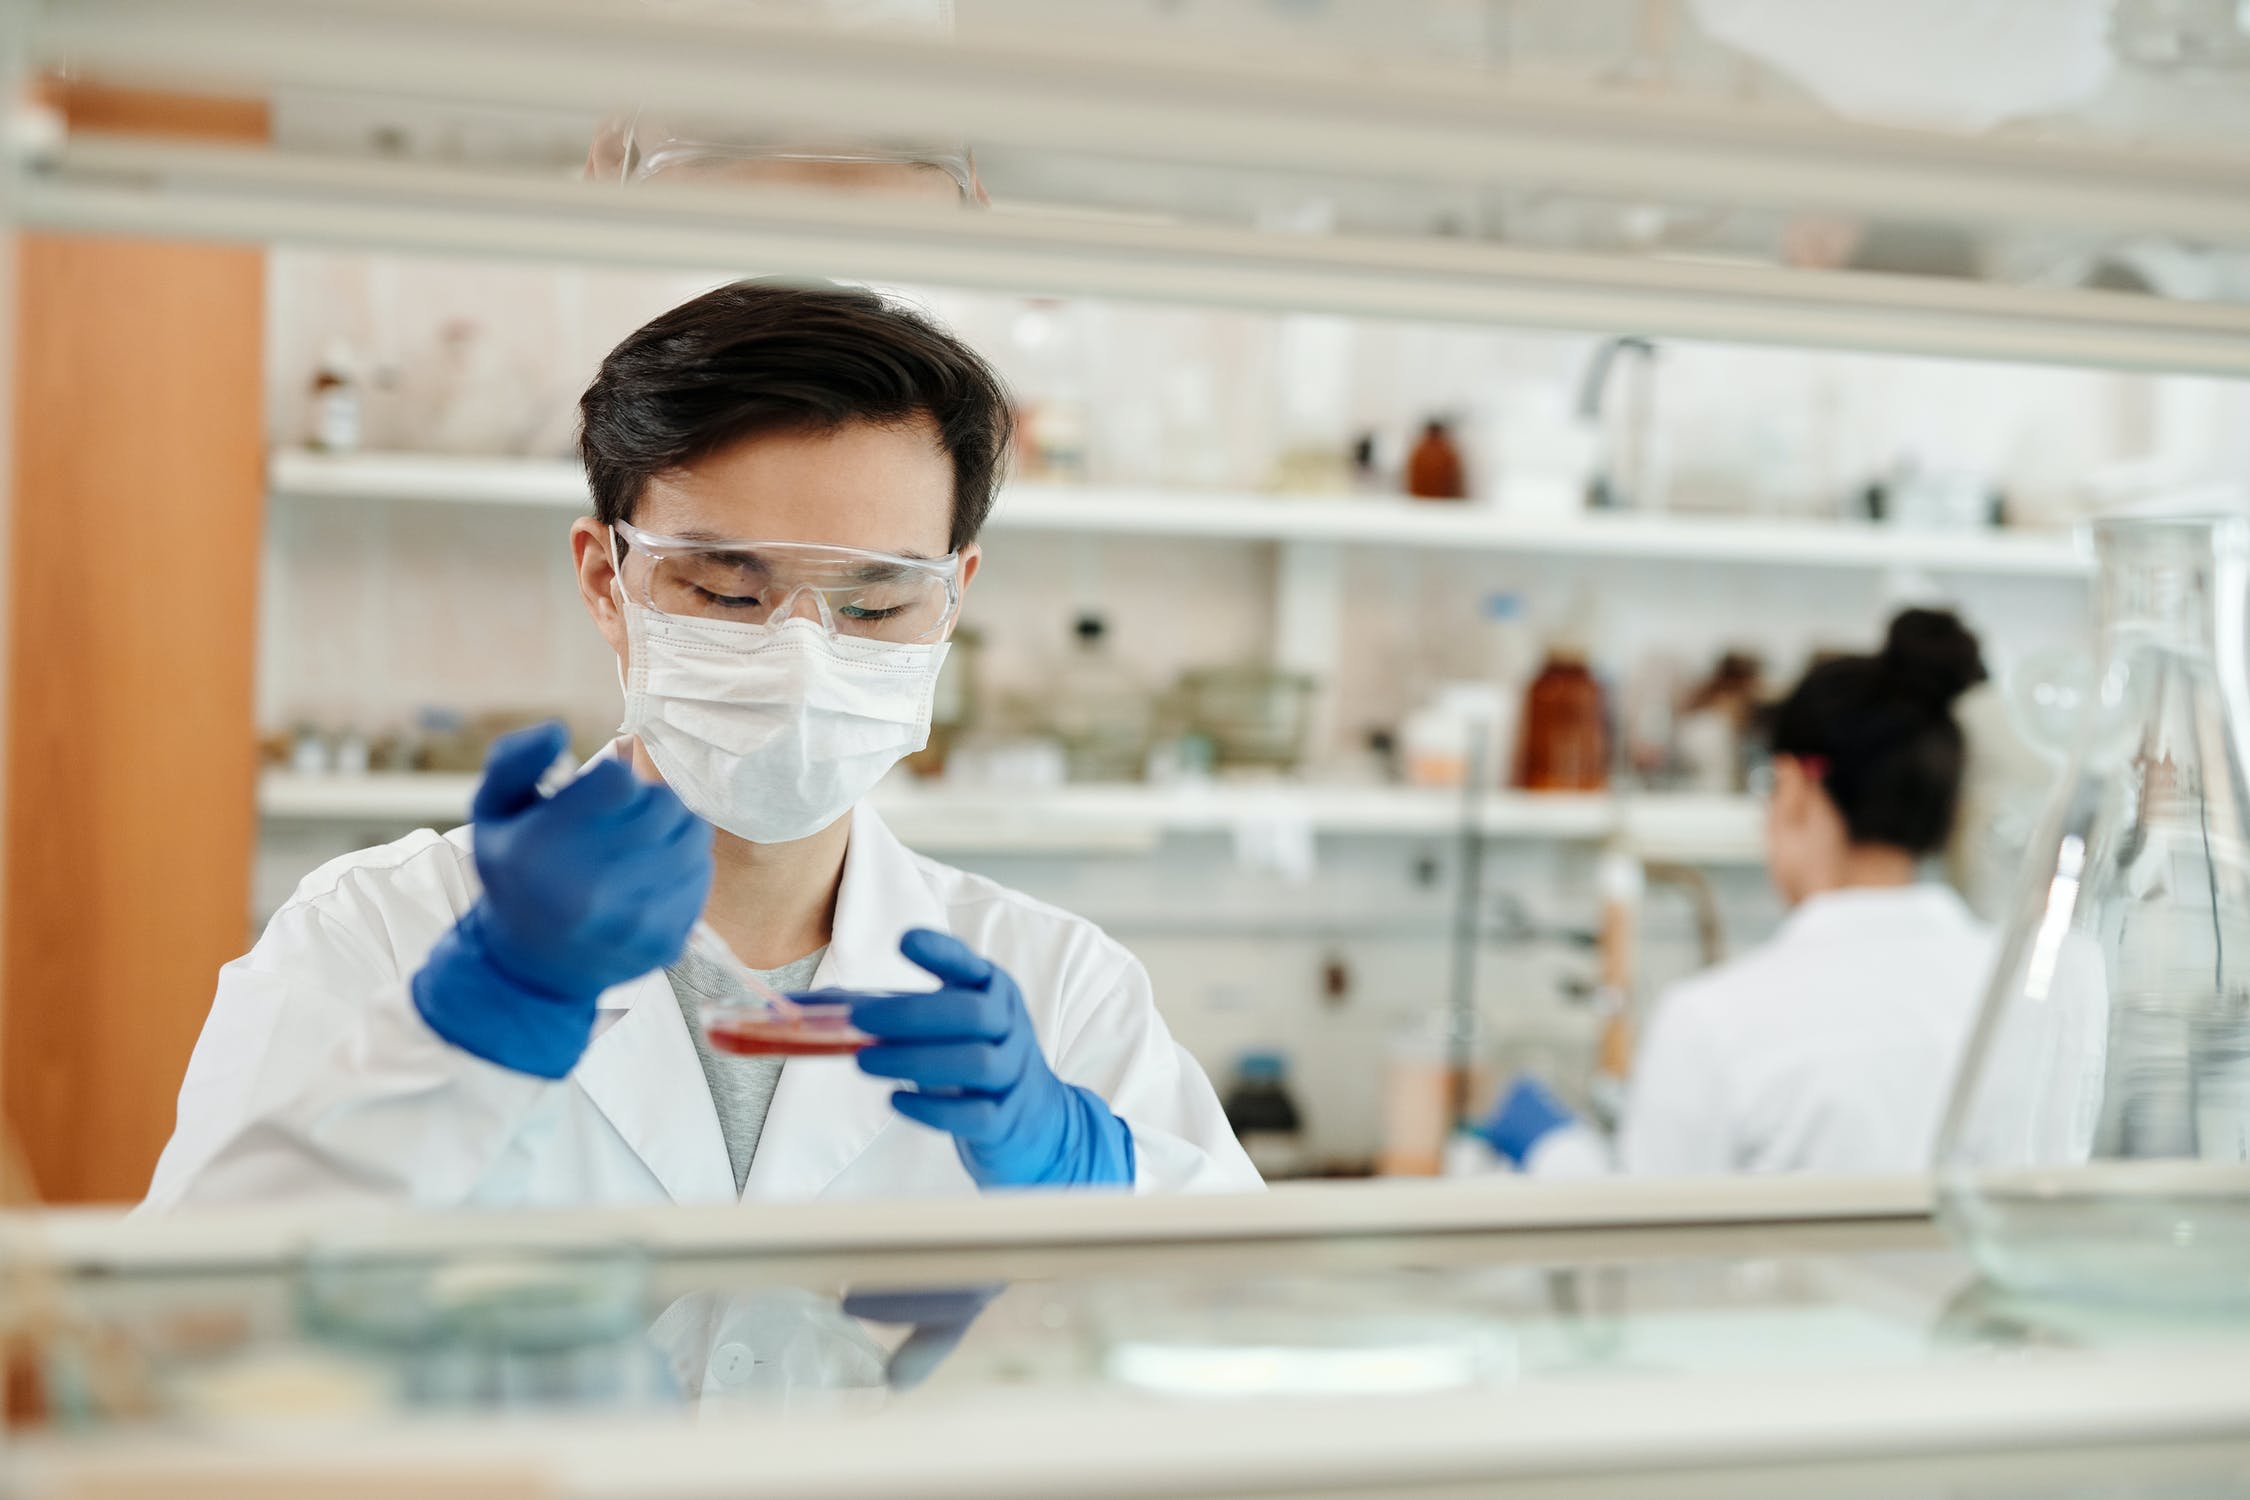 APAC IVD companies to watch in the infectious diseases diagnostics market